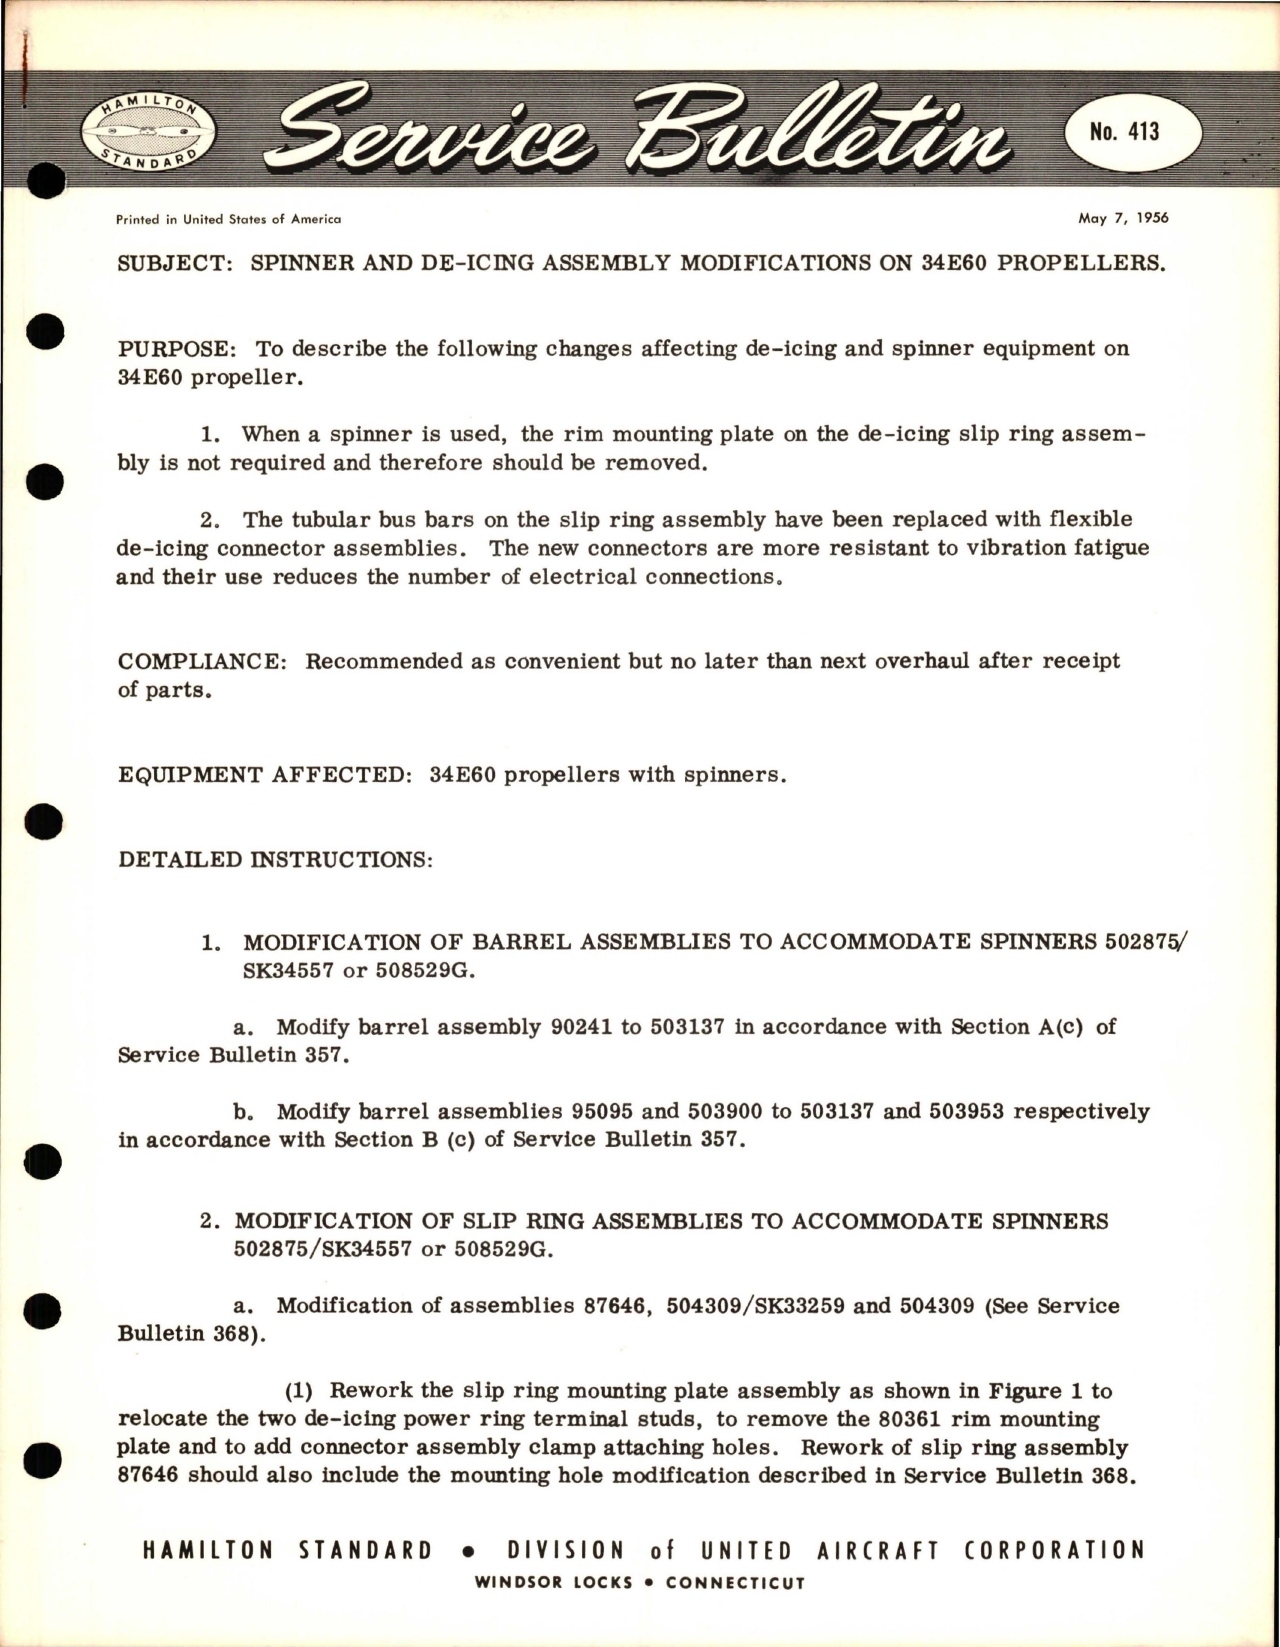 Sample page 1 from AirCorps Library document: Spinner and De-Icing Assembly Modifications on 34E60 Propellers